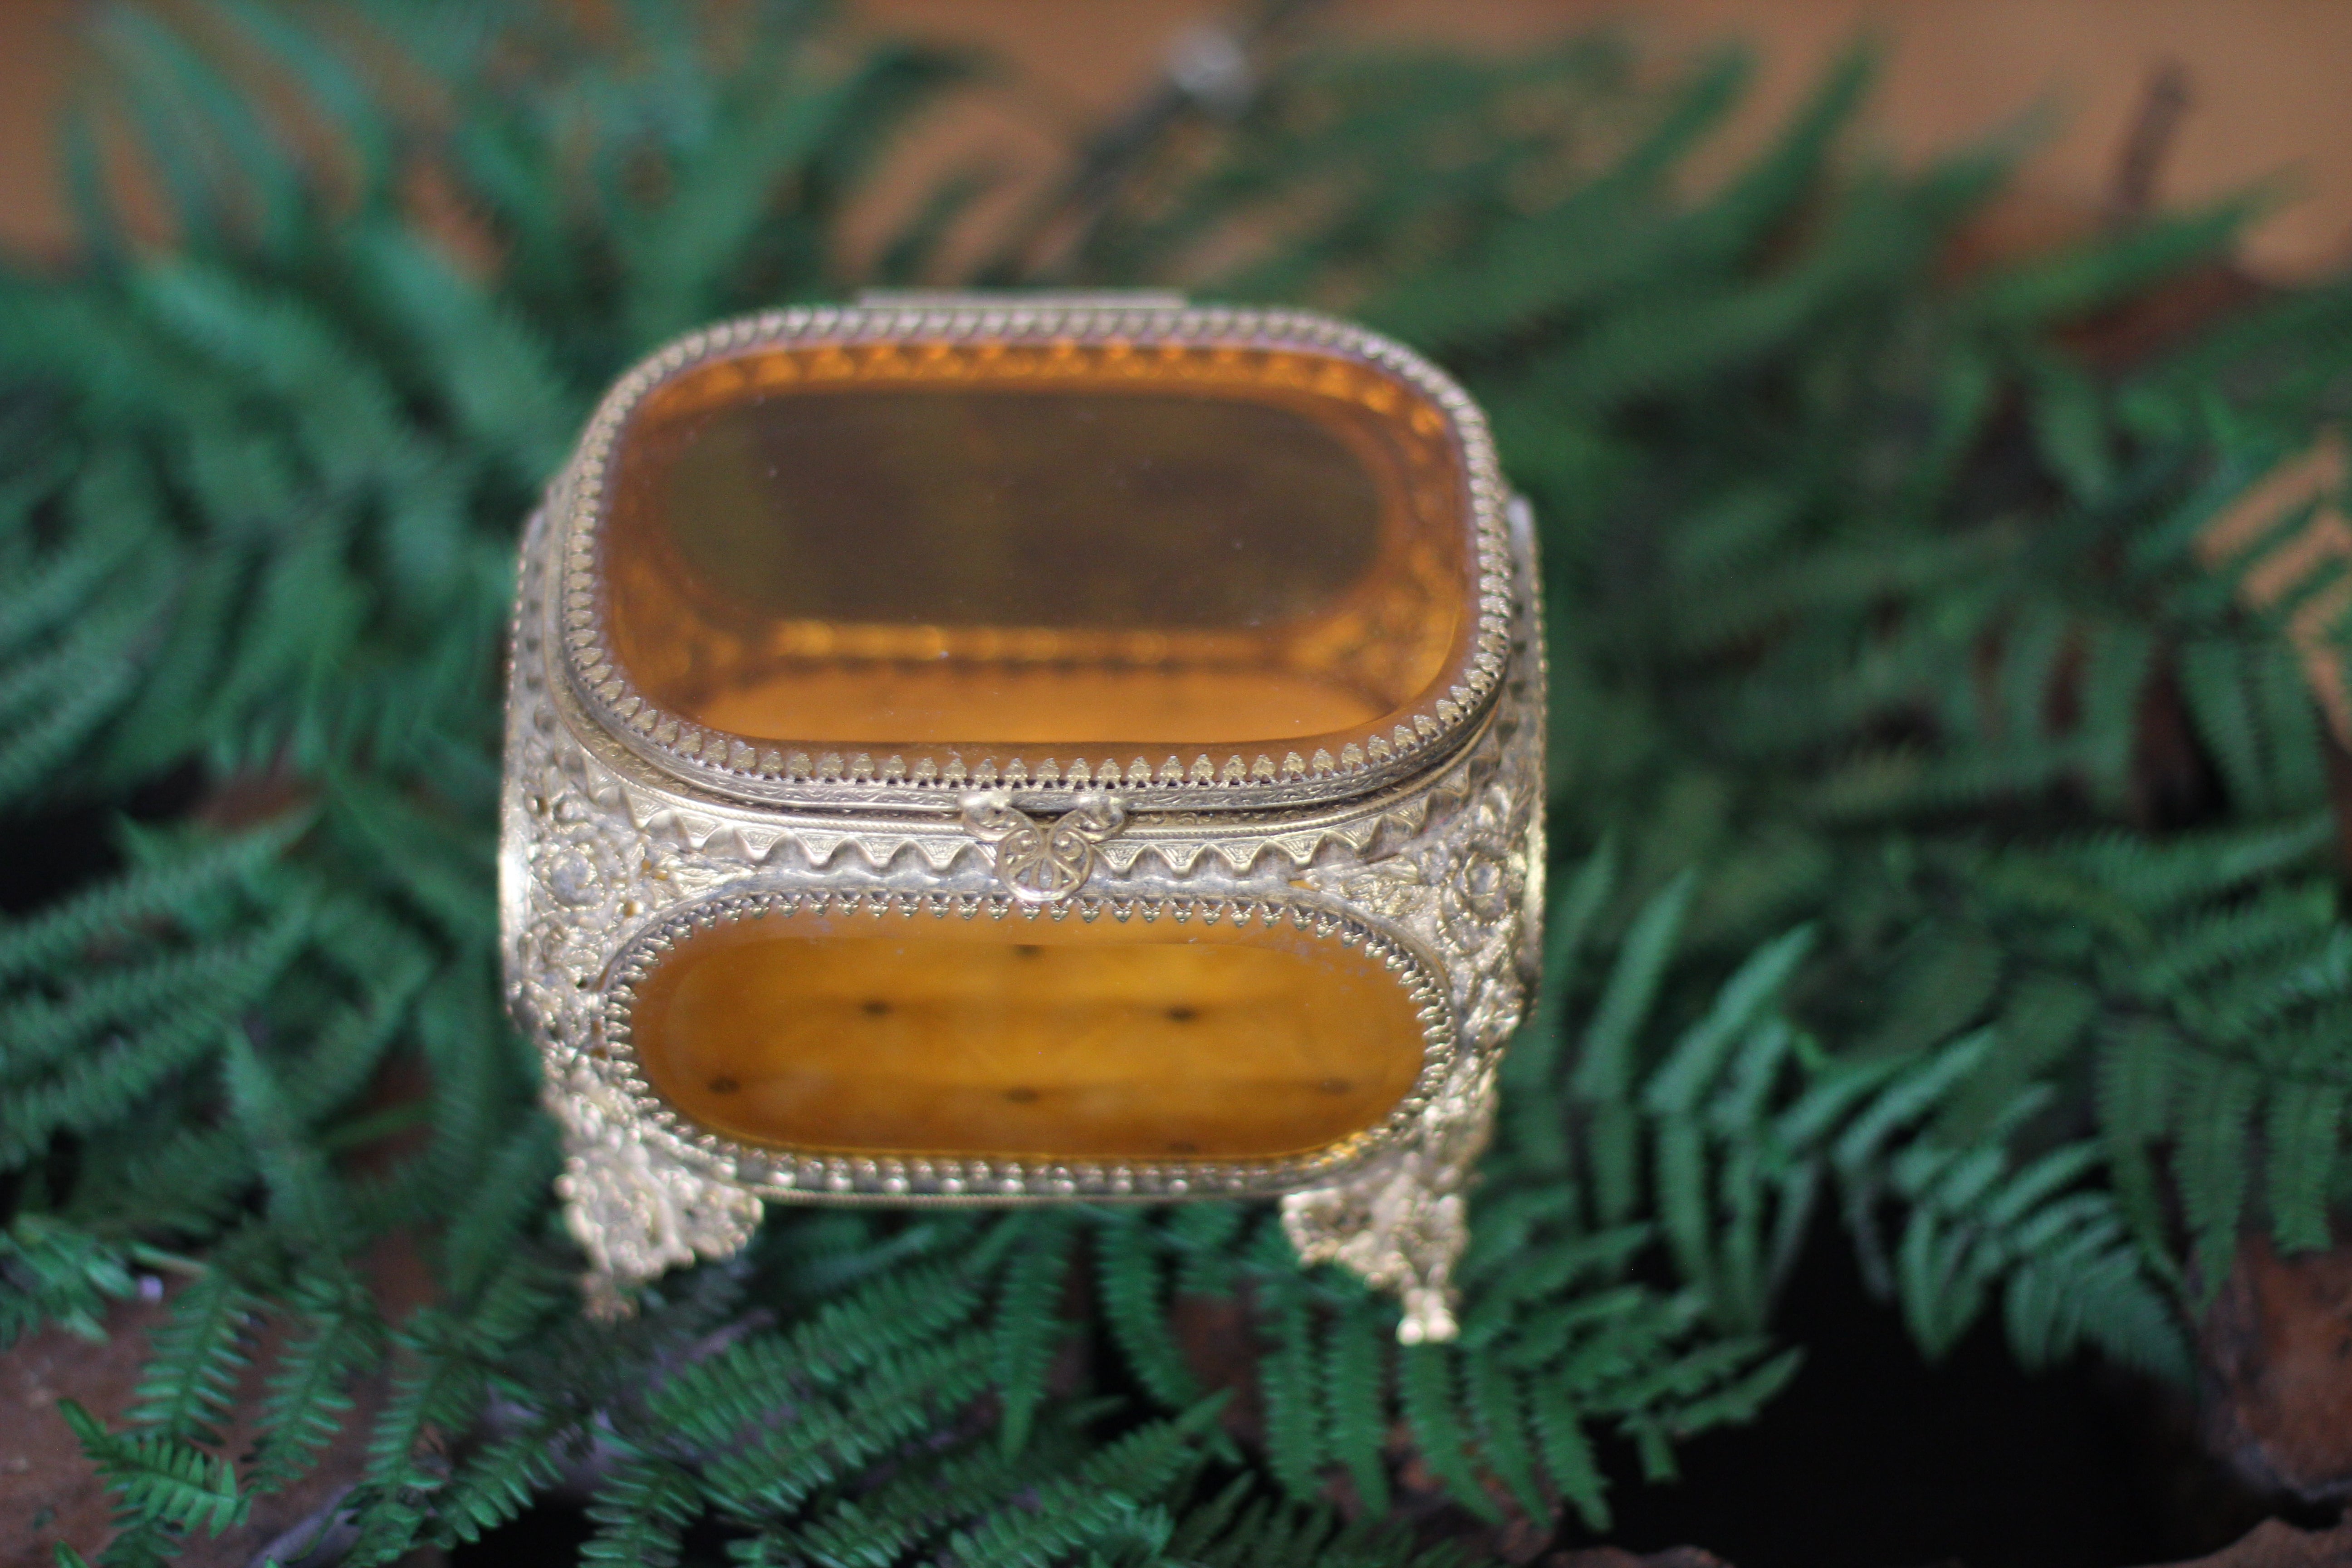 Antique Floral Amber Tinted Glass Jewelry Box